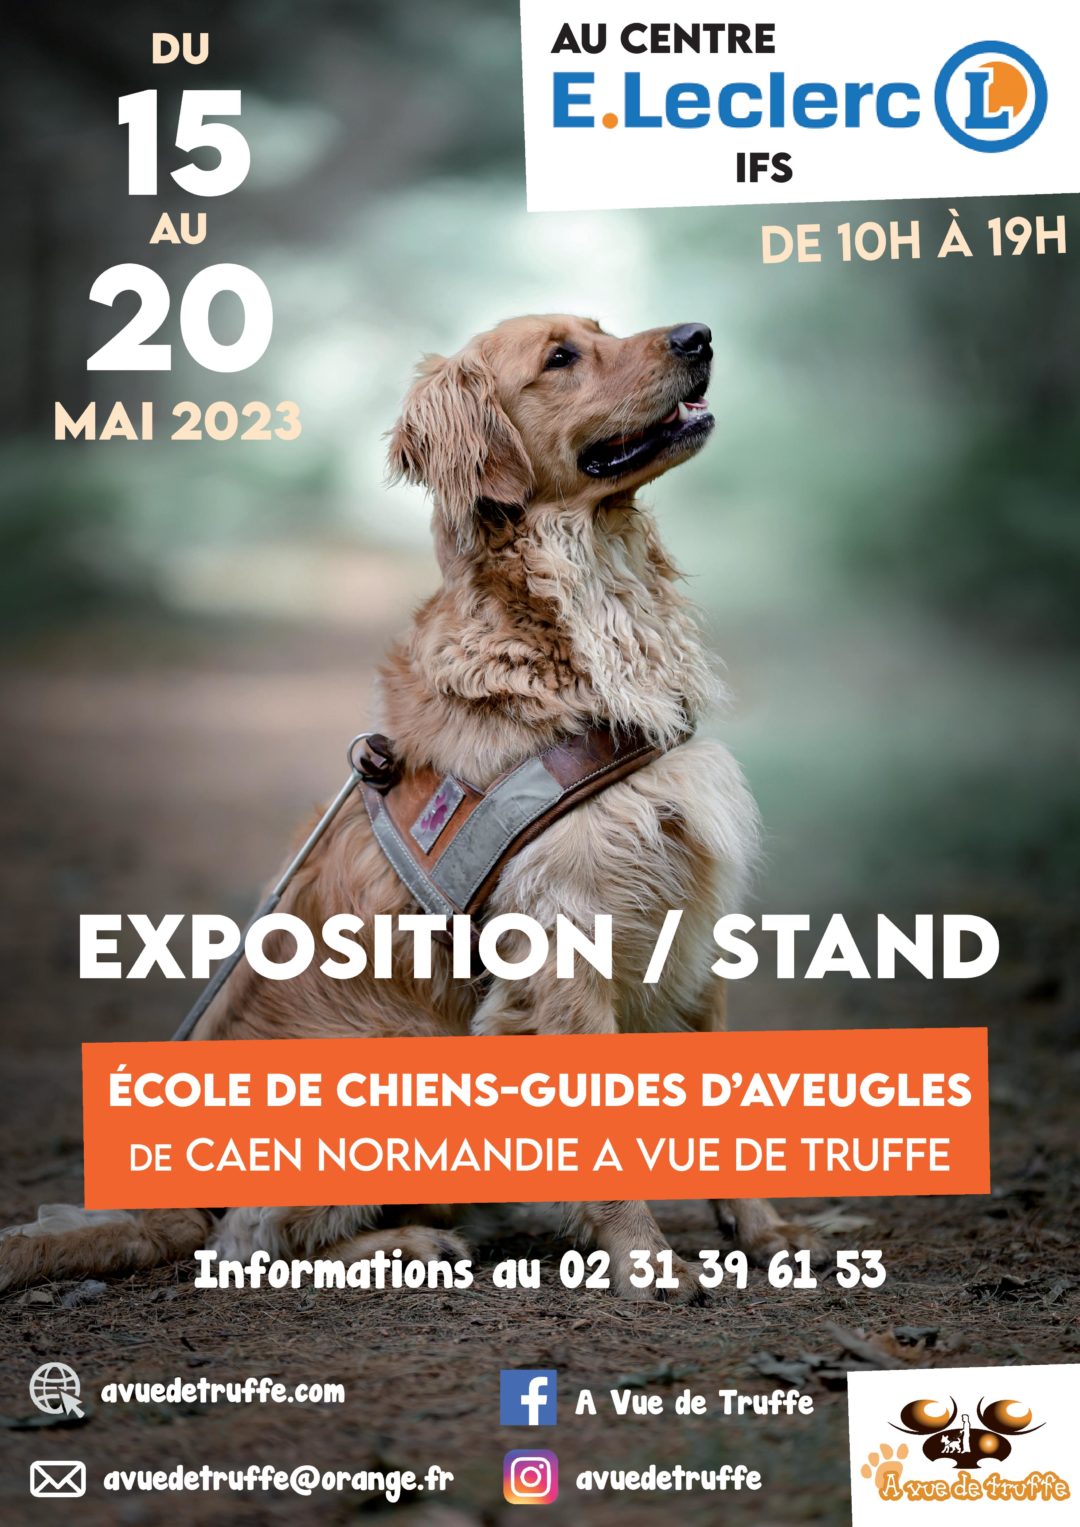 Expo/Stand – Leclerc Ifs